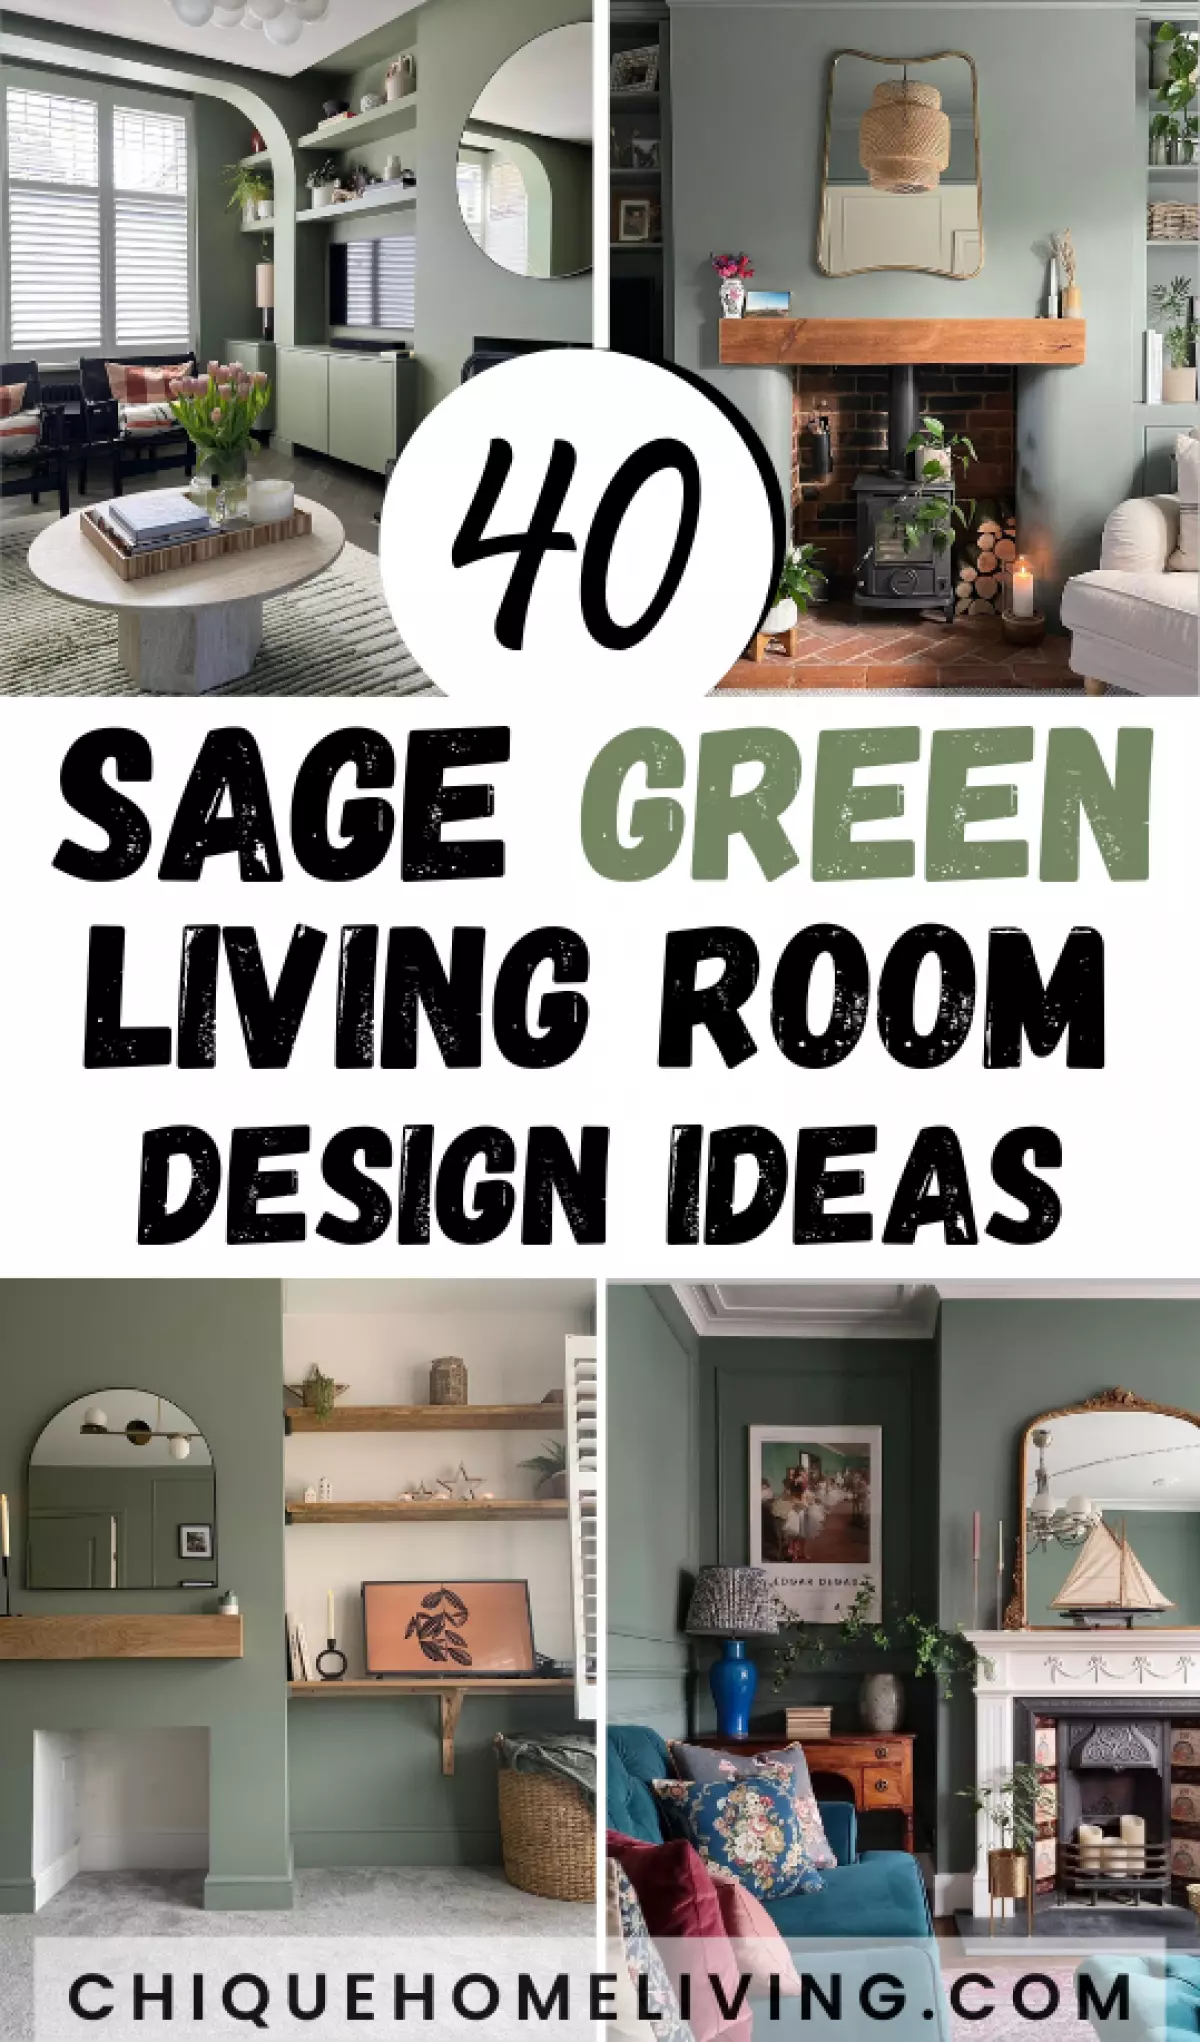 My Pin Templates 1 1 Sage Green Living Room